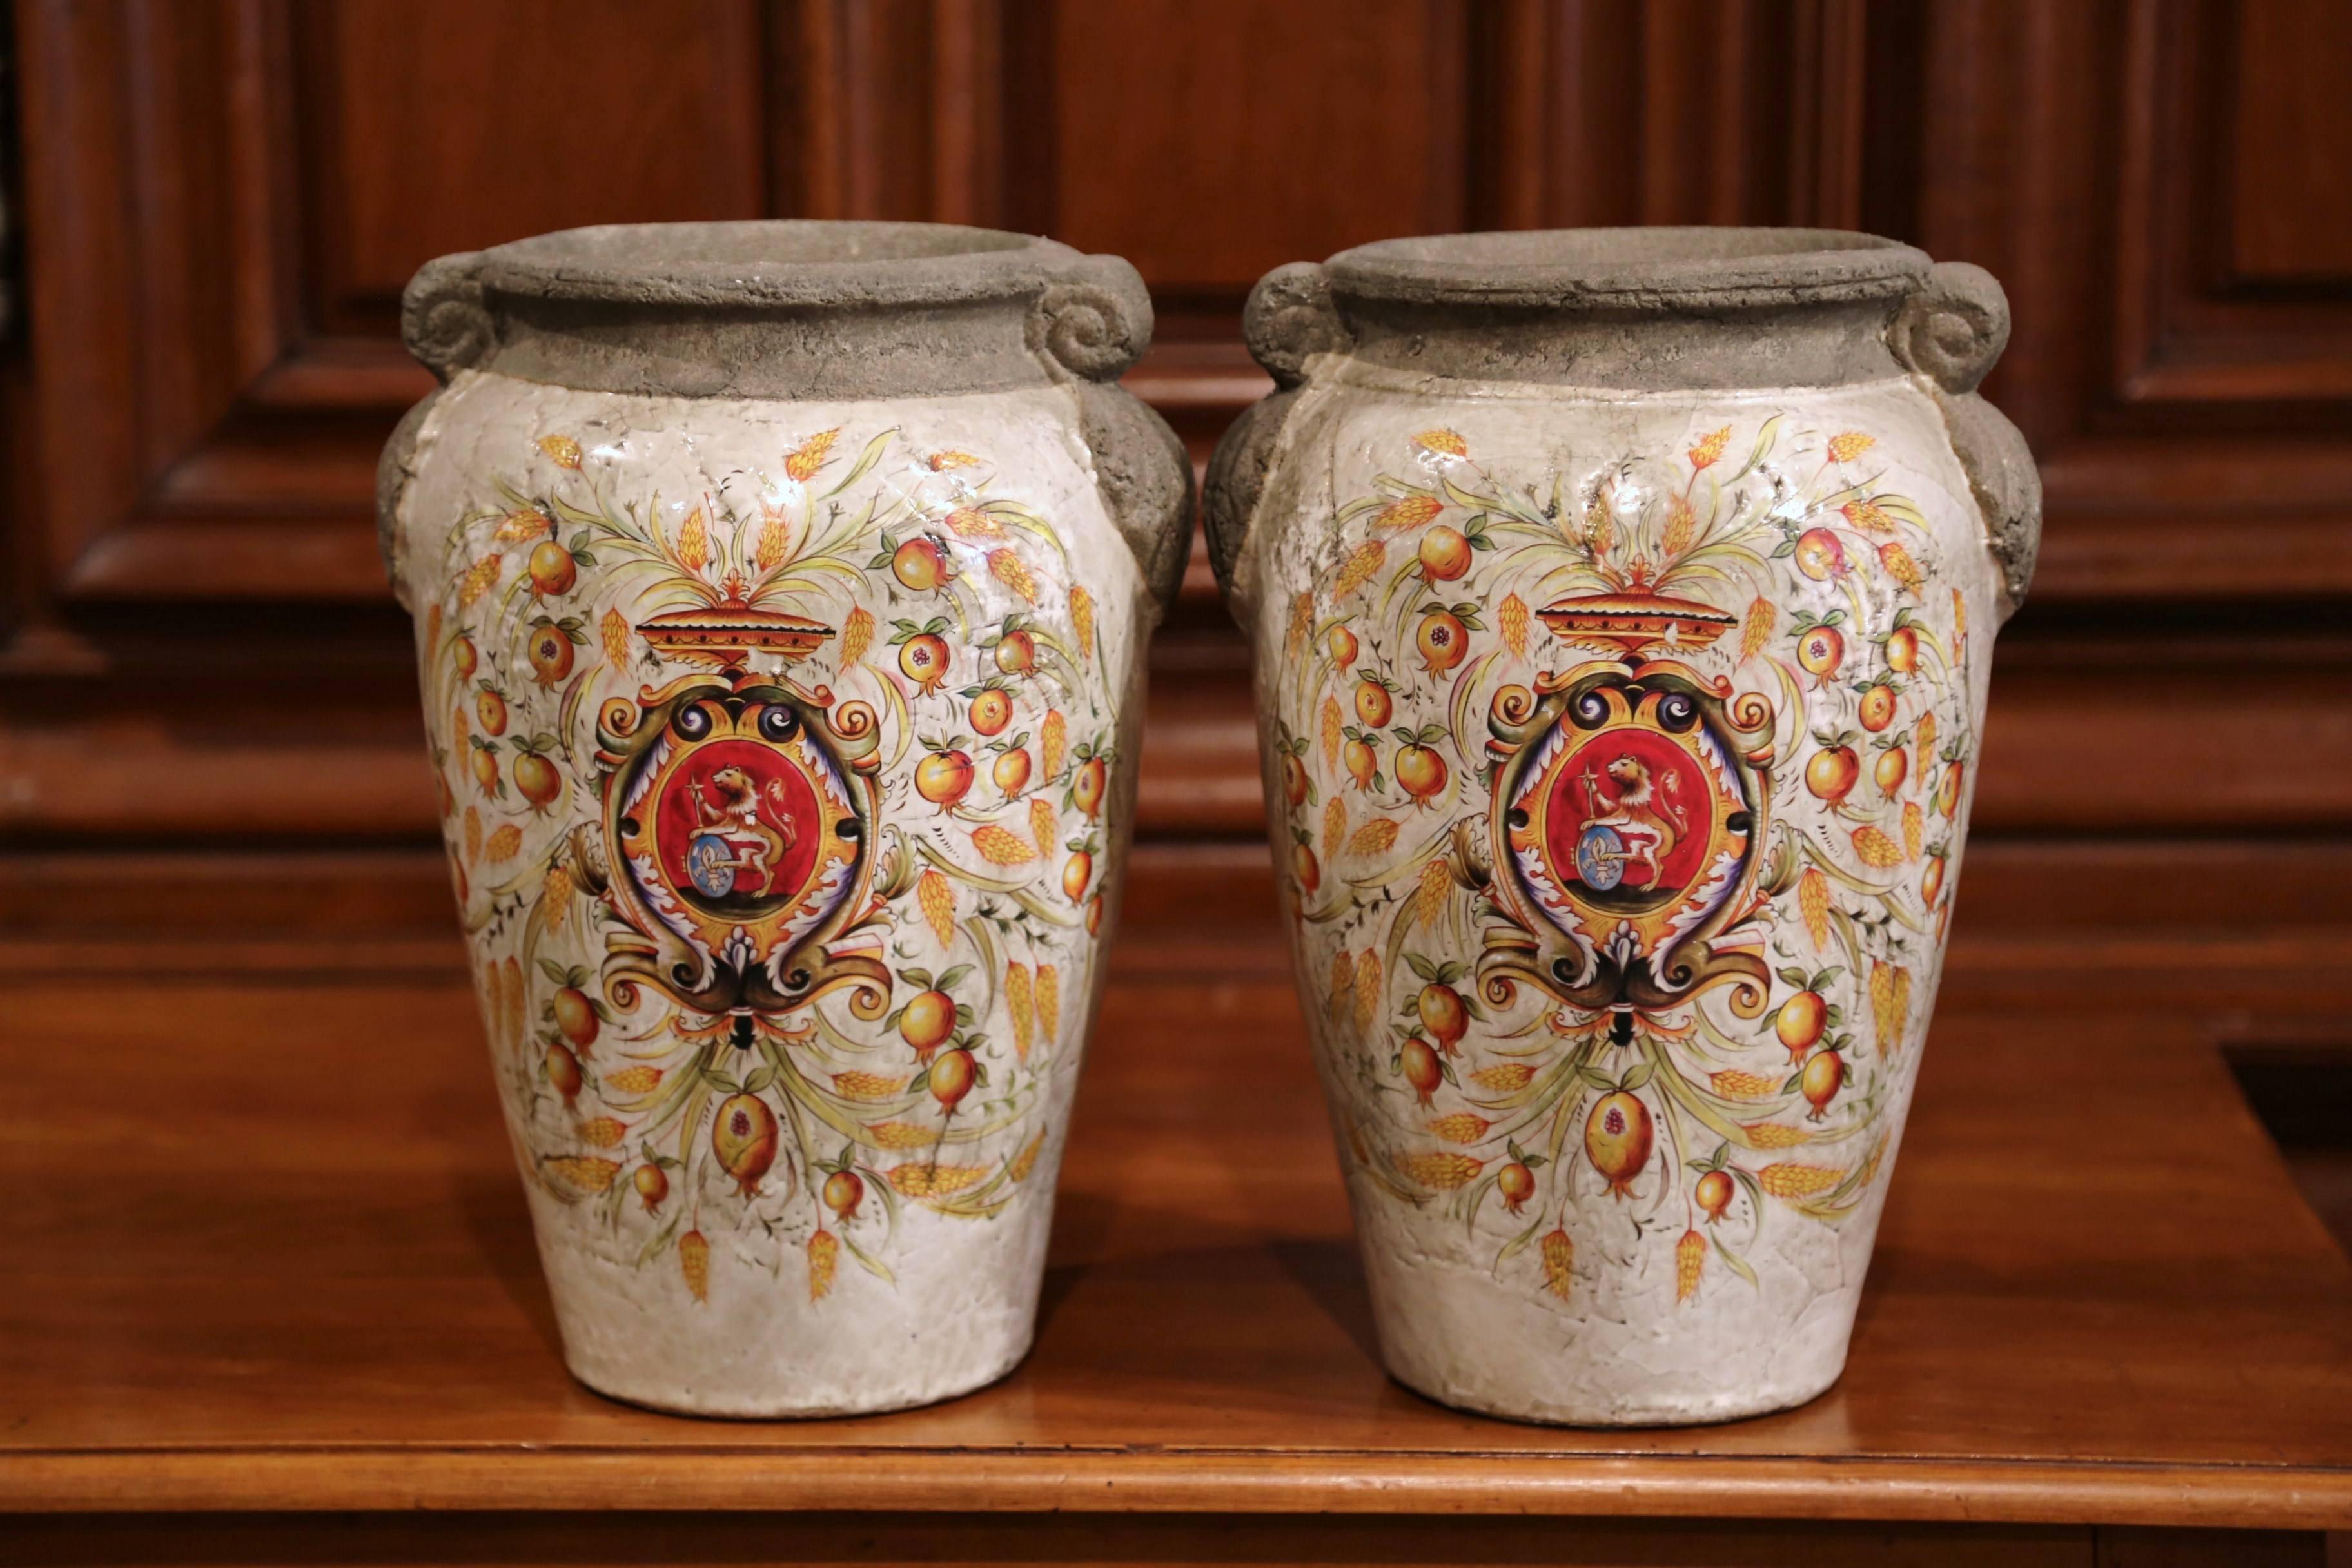 Ceramic Pair of Italian Decorative Hand-Painted Vases with Wheat and Fruit